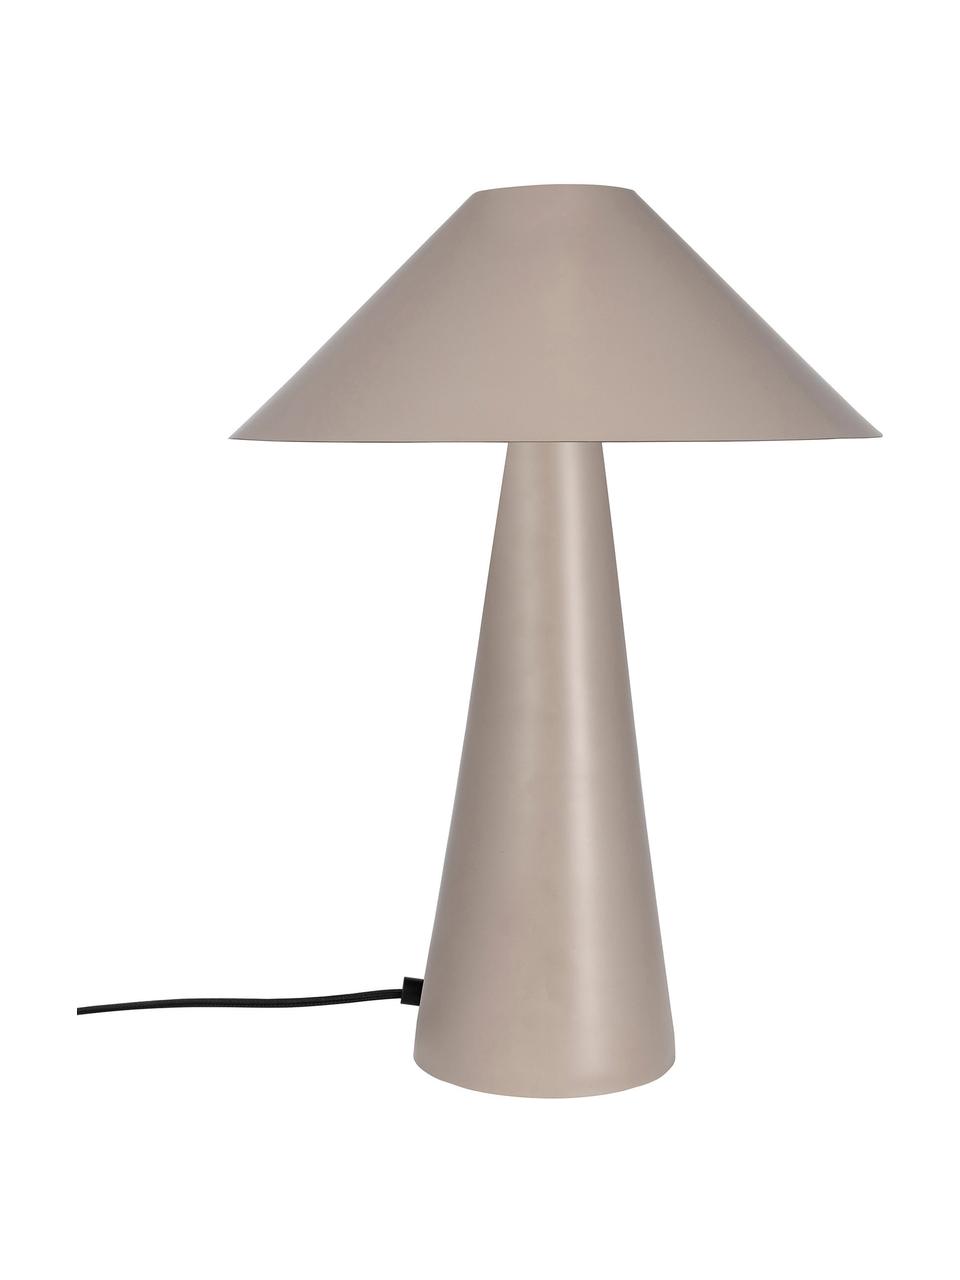 Lampe à poser design taupe Cannes, Taupe